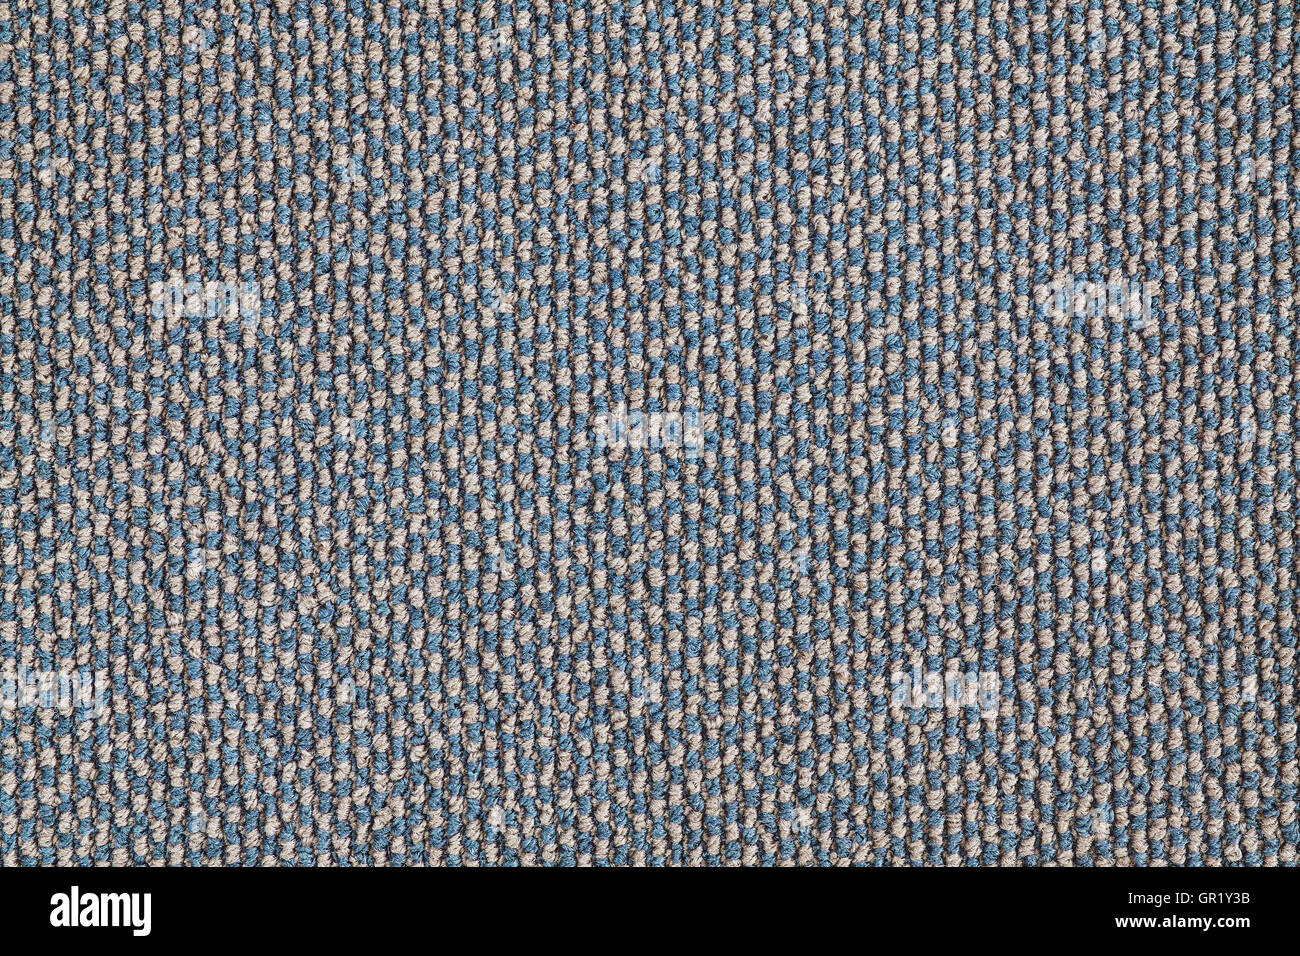 High quality close up picture of a carpet fabric texture. Stock Photo